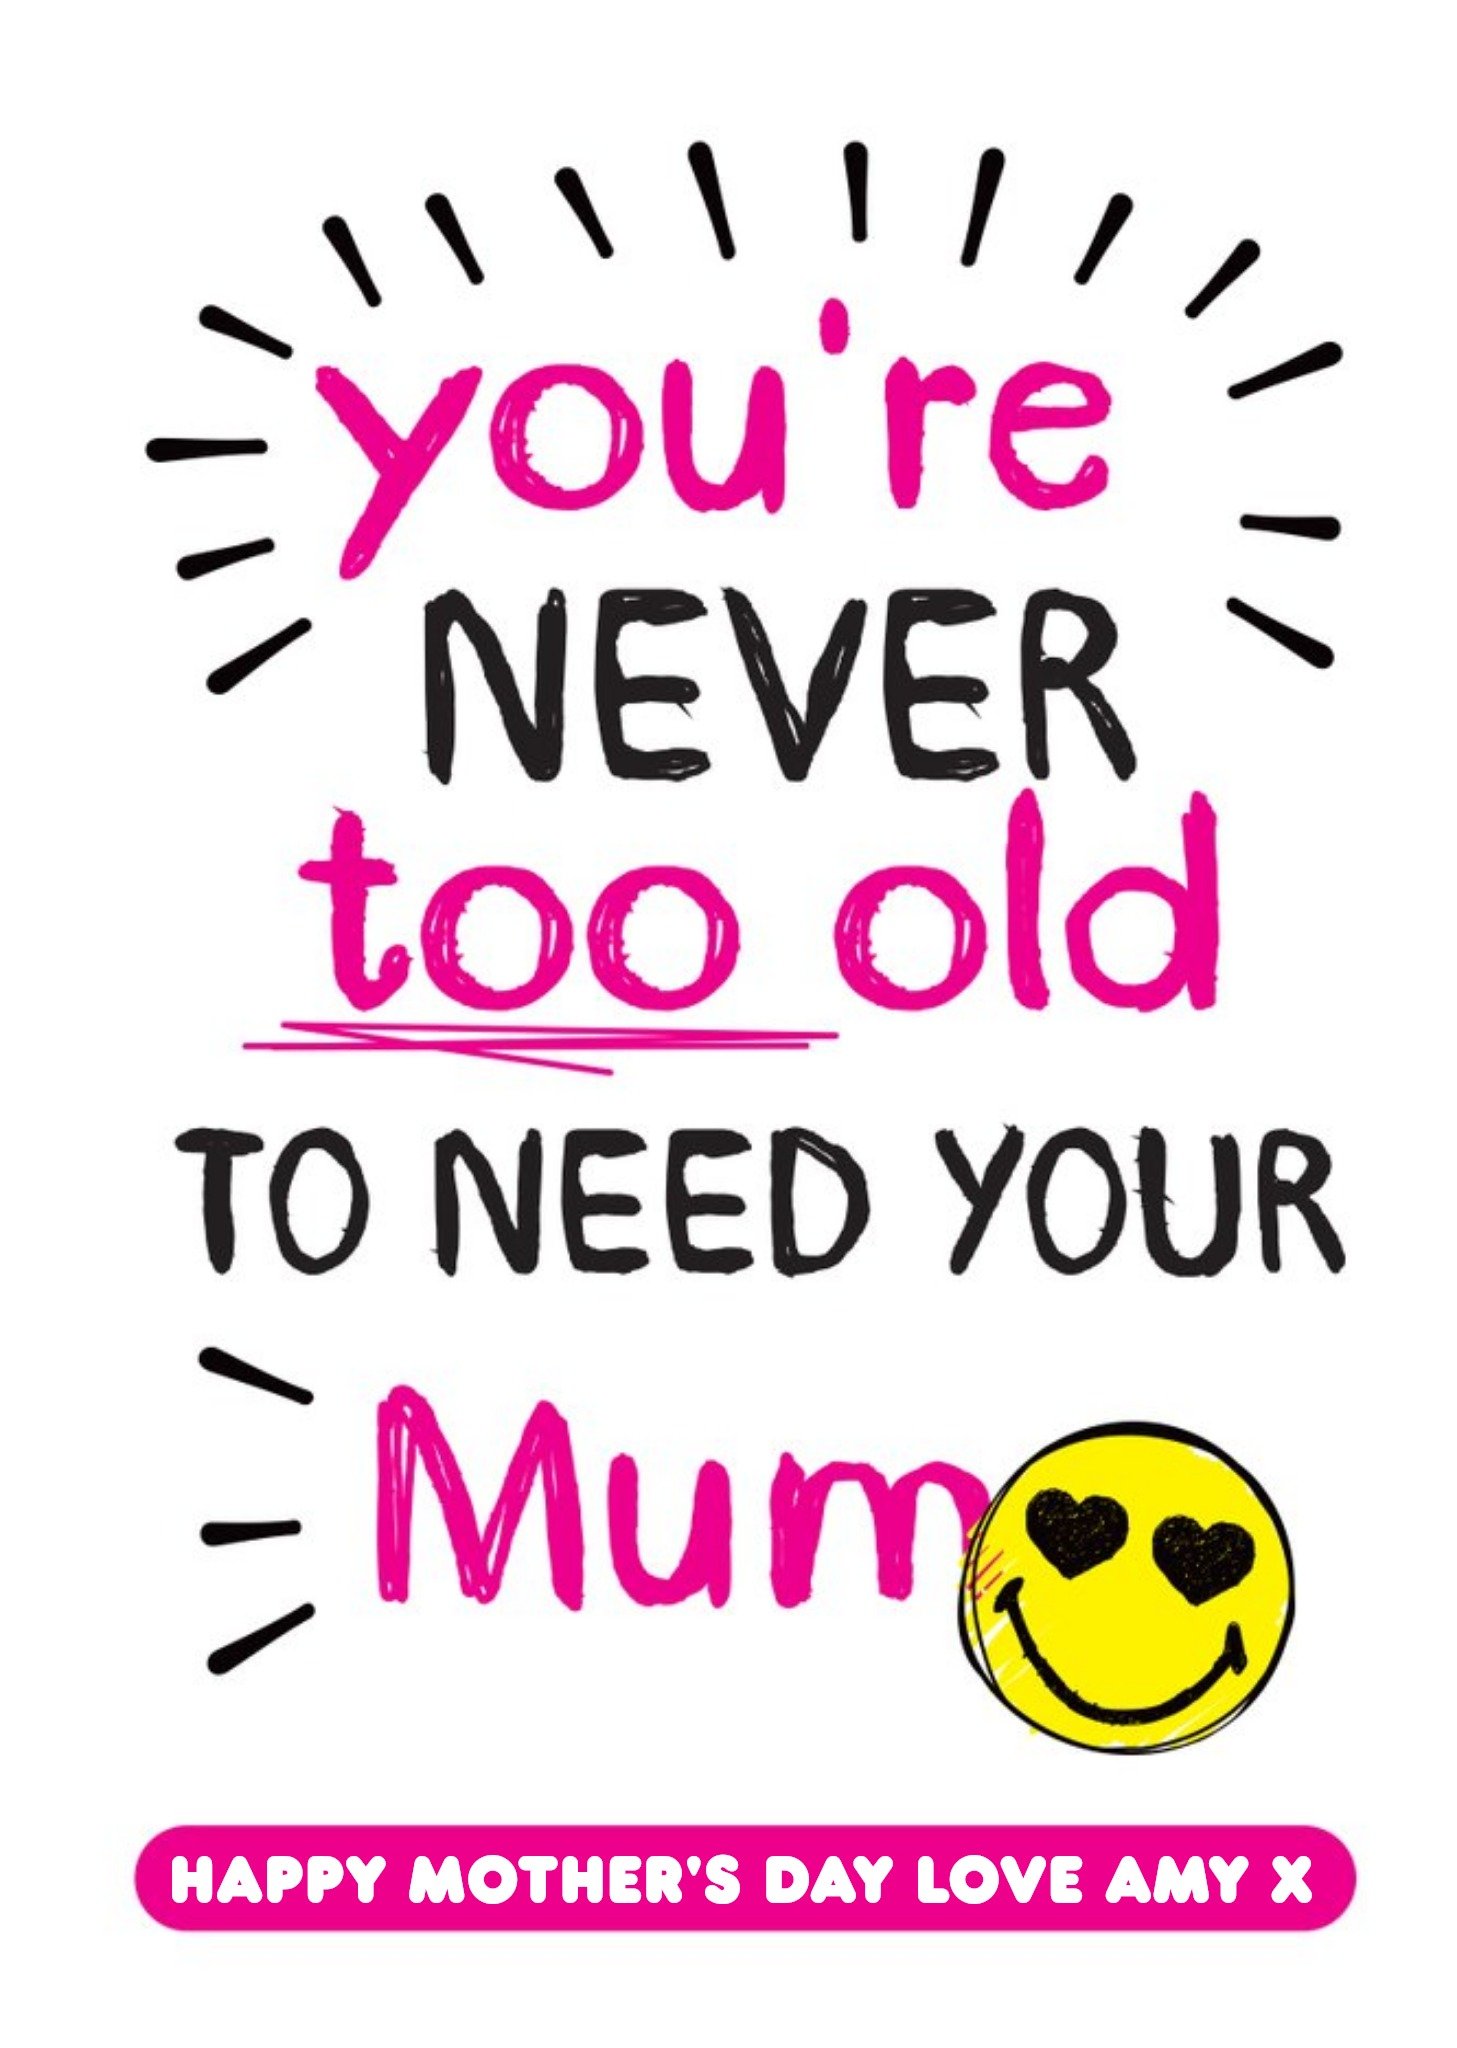 Moonpig You're Never Too Old To Need Your Mum Mother's Day Smiley Emoji Card Ecard